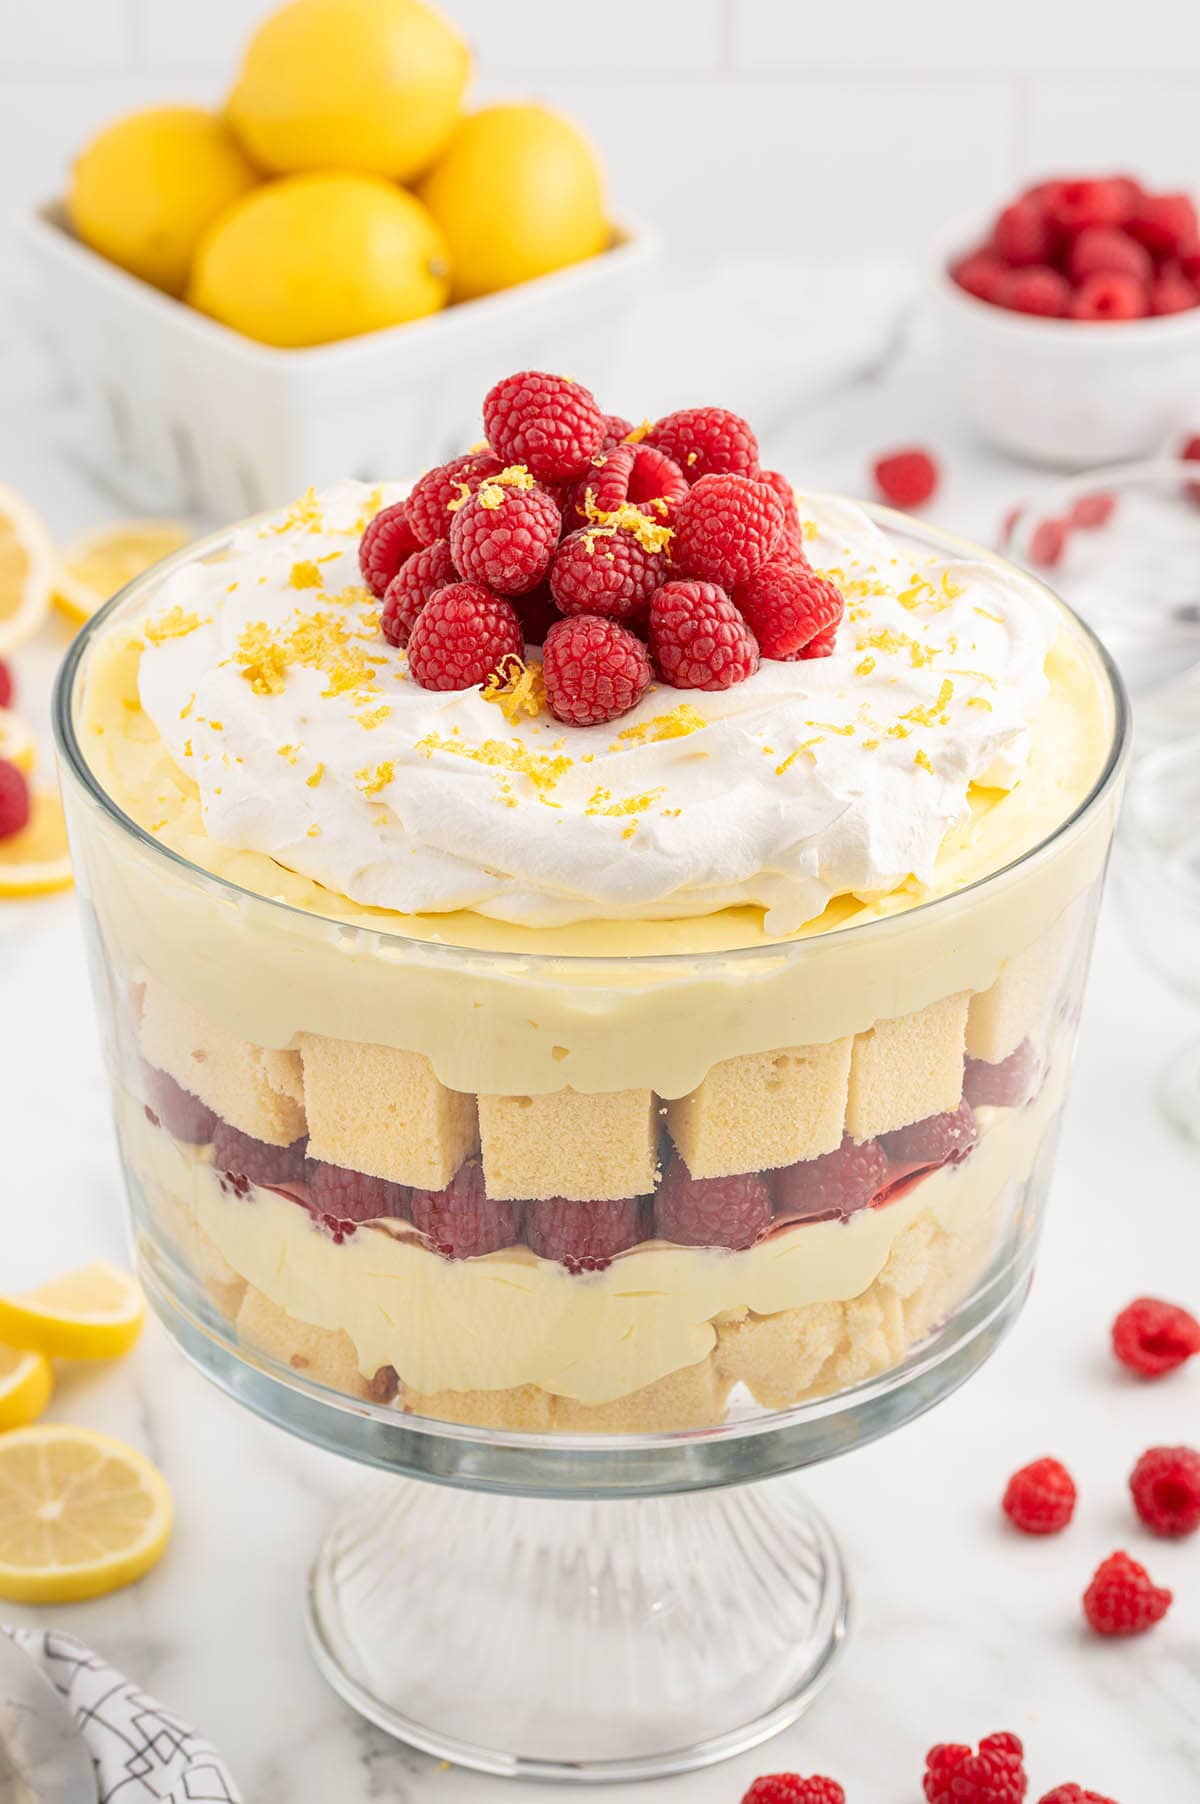 Lemon Raspberry Trifle in a trifle bowl topped with fresh raspberries.